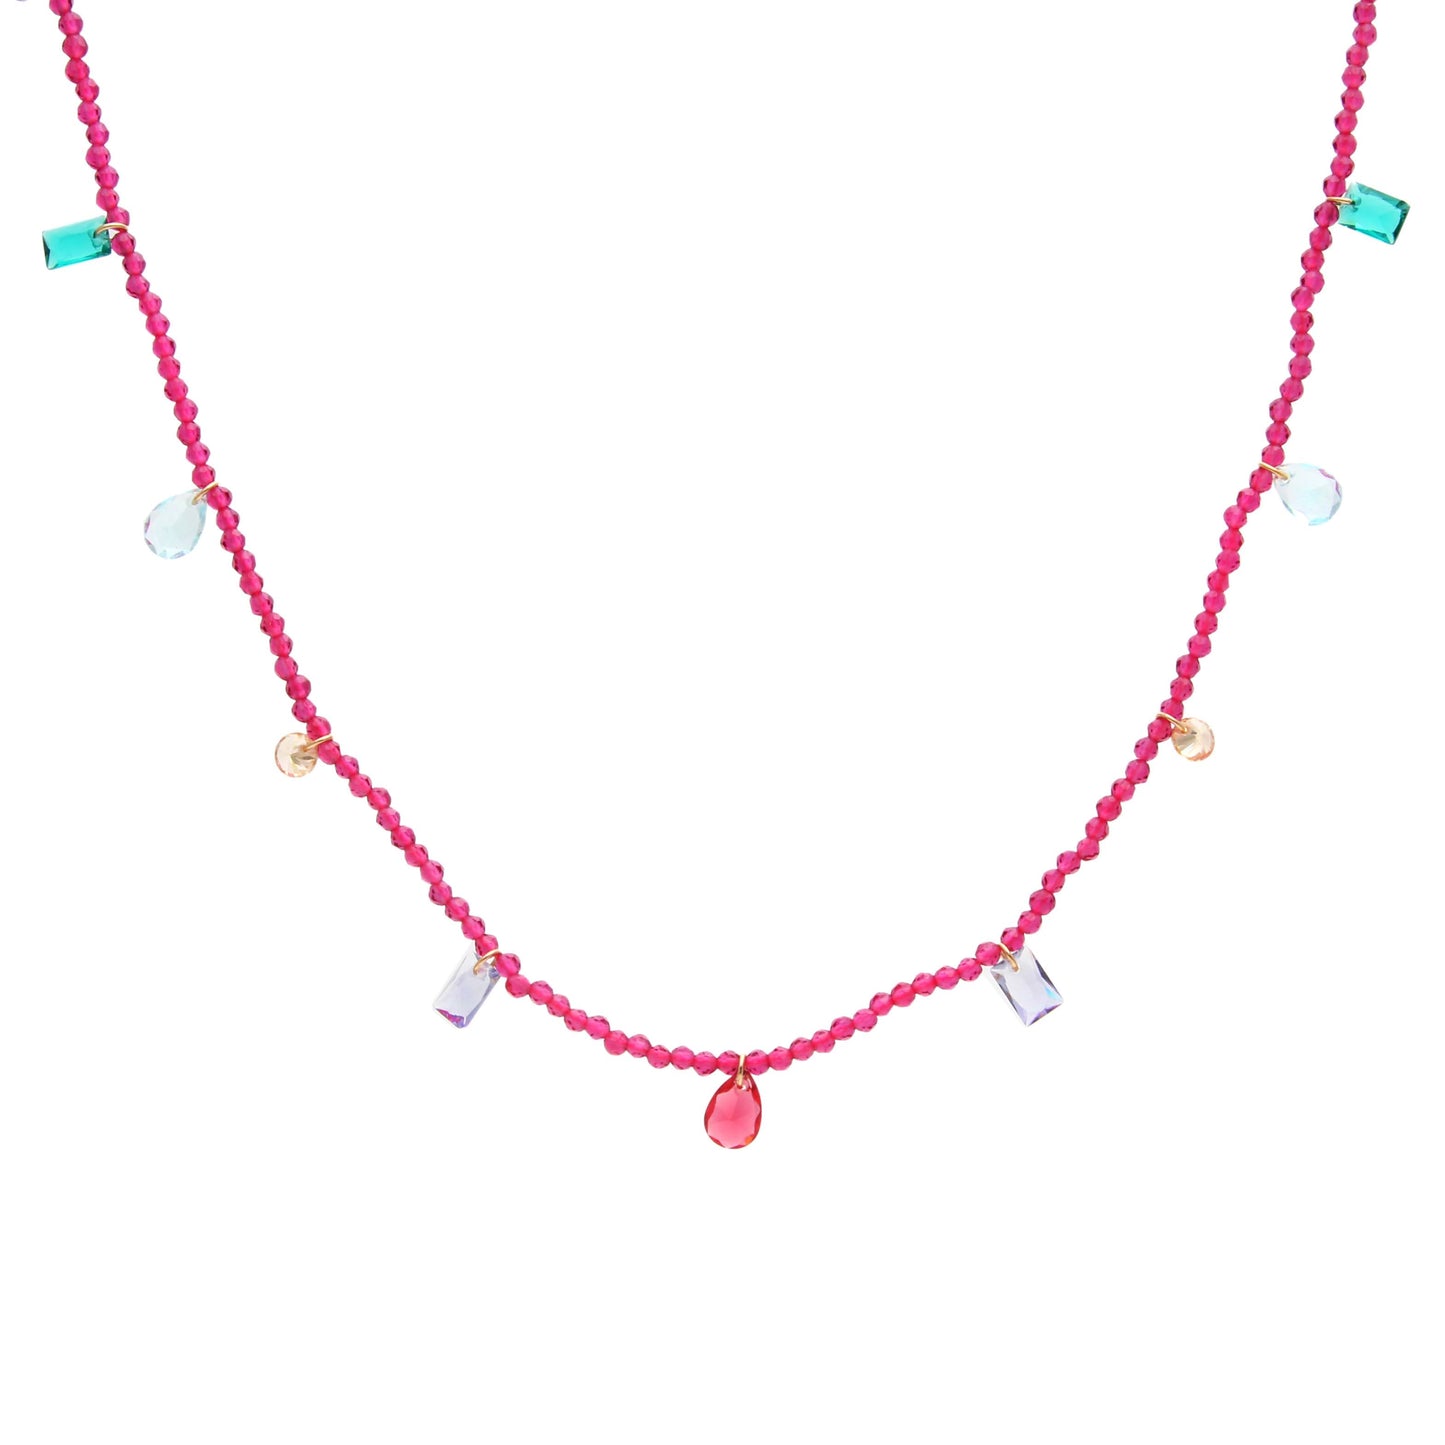 18K gold plated necklace with pink tourmaline and colorful pendants